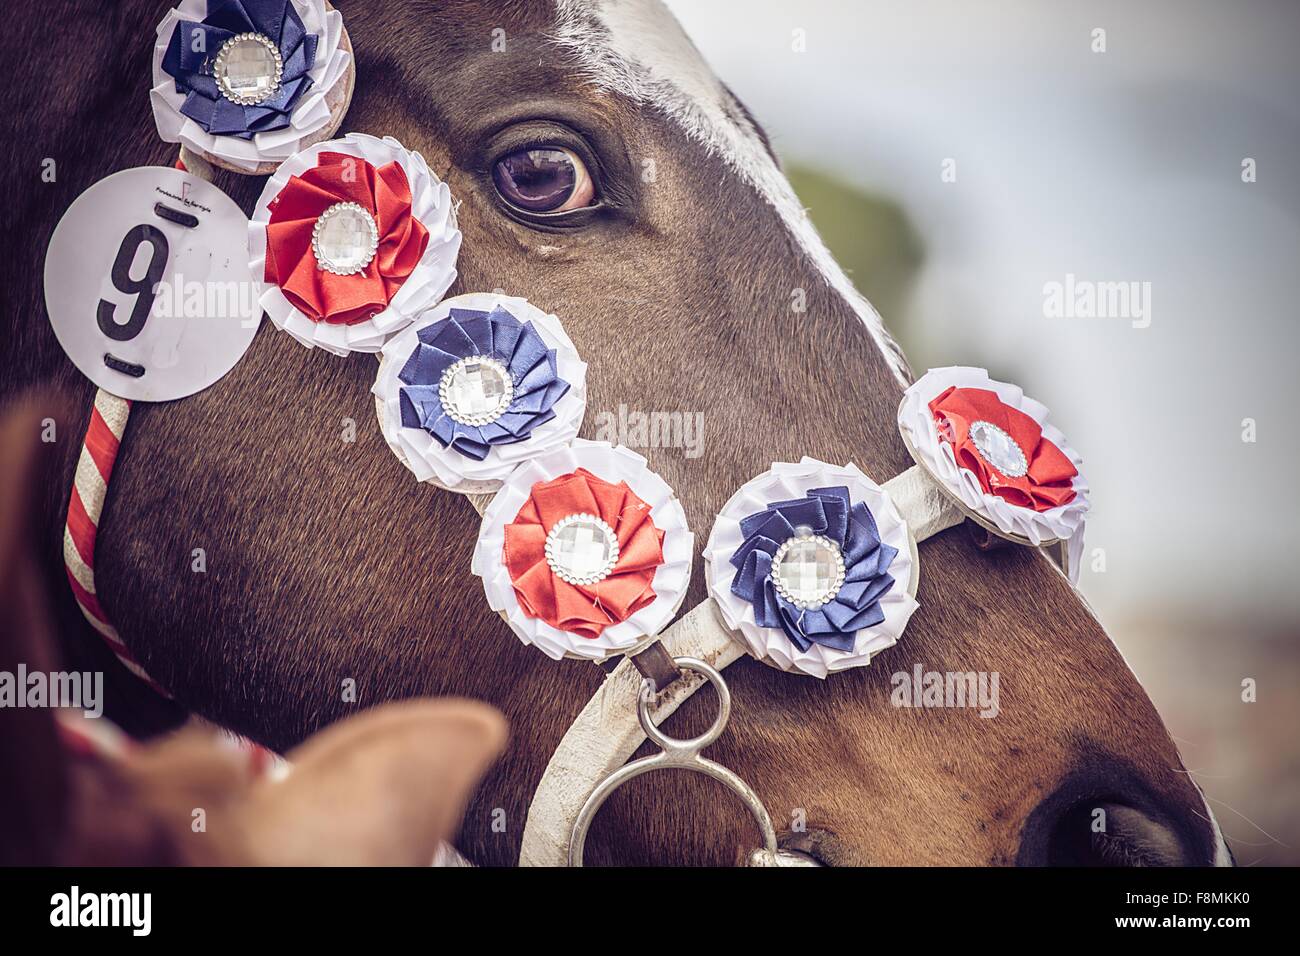 Horse decorated with horse show rosettes Stock Photo